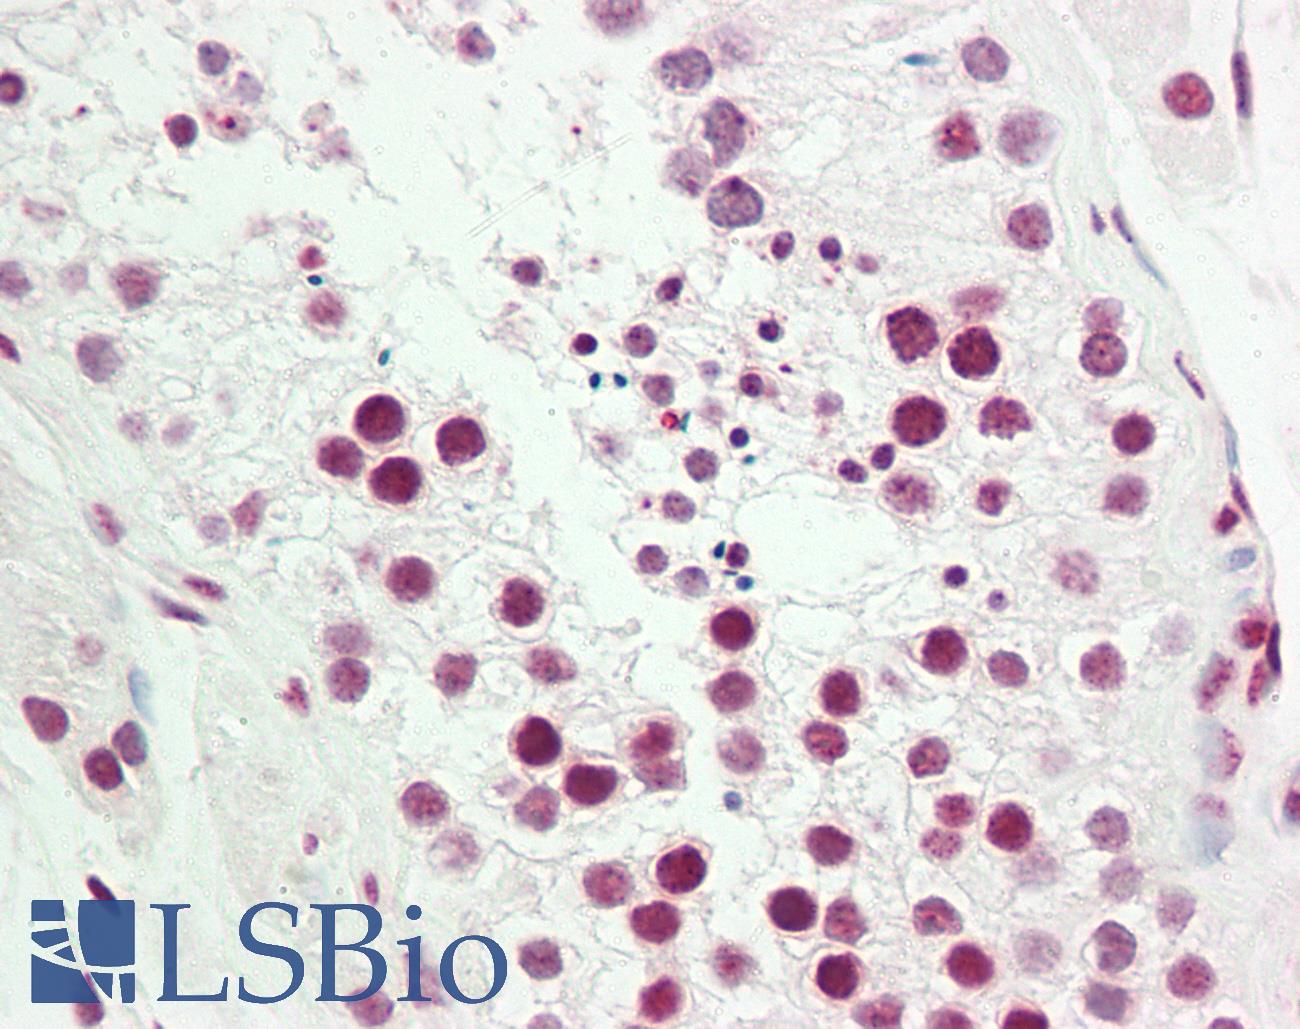 COUP-TFII / NR2F2 Antibody - Anti-COUP-TFII / NR2F2 antibody IHC staining of human testis. Immunohistochemistry of formalin-fixed, paraffin-embedded tissue after heat-induced antigen retrieval. Antibody dilution 1:50.